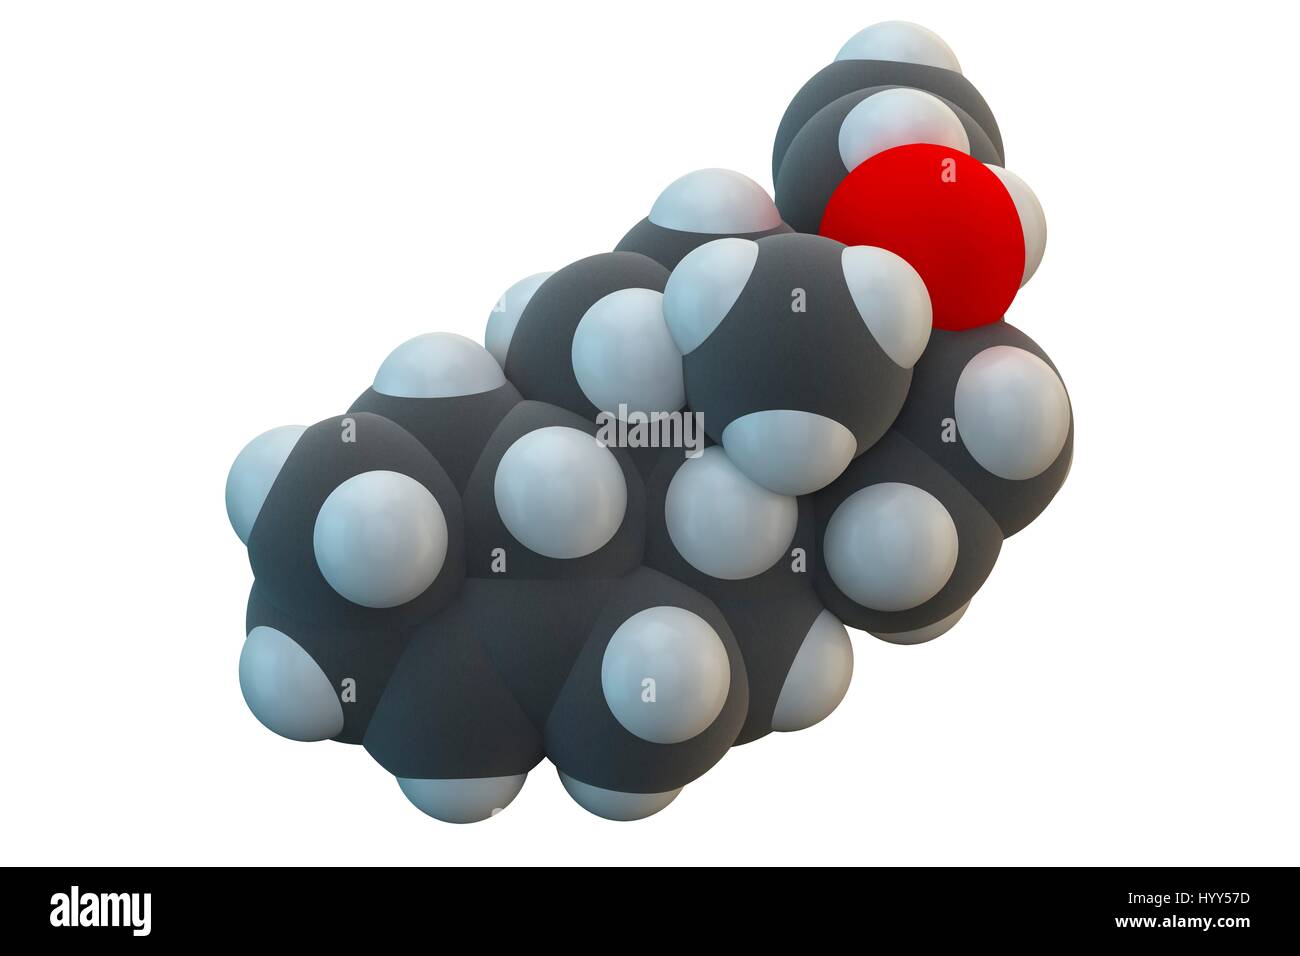 Allylestrenol drug molecule. Used for miscarriage prevention and prevention of premature labour. Chemical formula is C21H32O. Atoms are represented as spheres: carbon (grey), hydrogen (white), oxygen (red). Illustration. Stock Photo